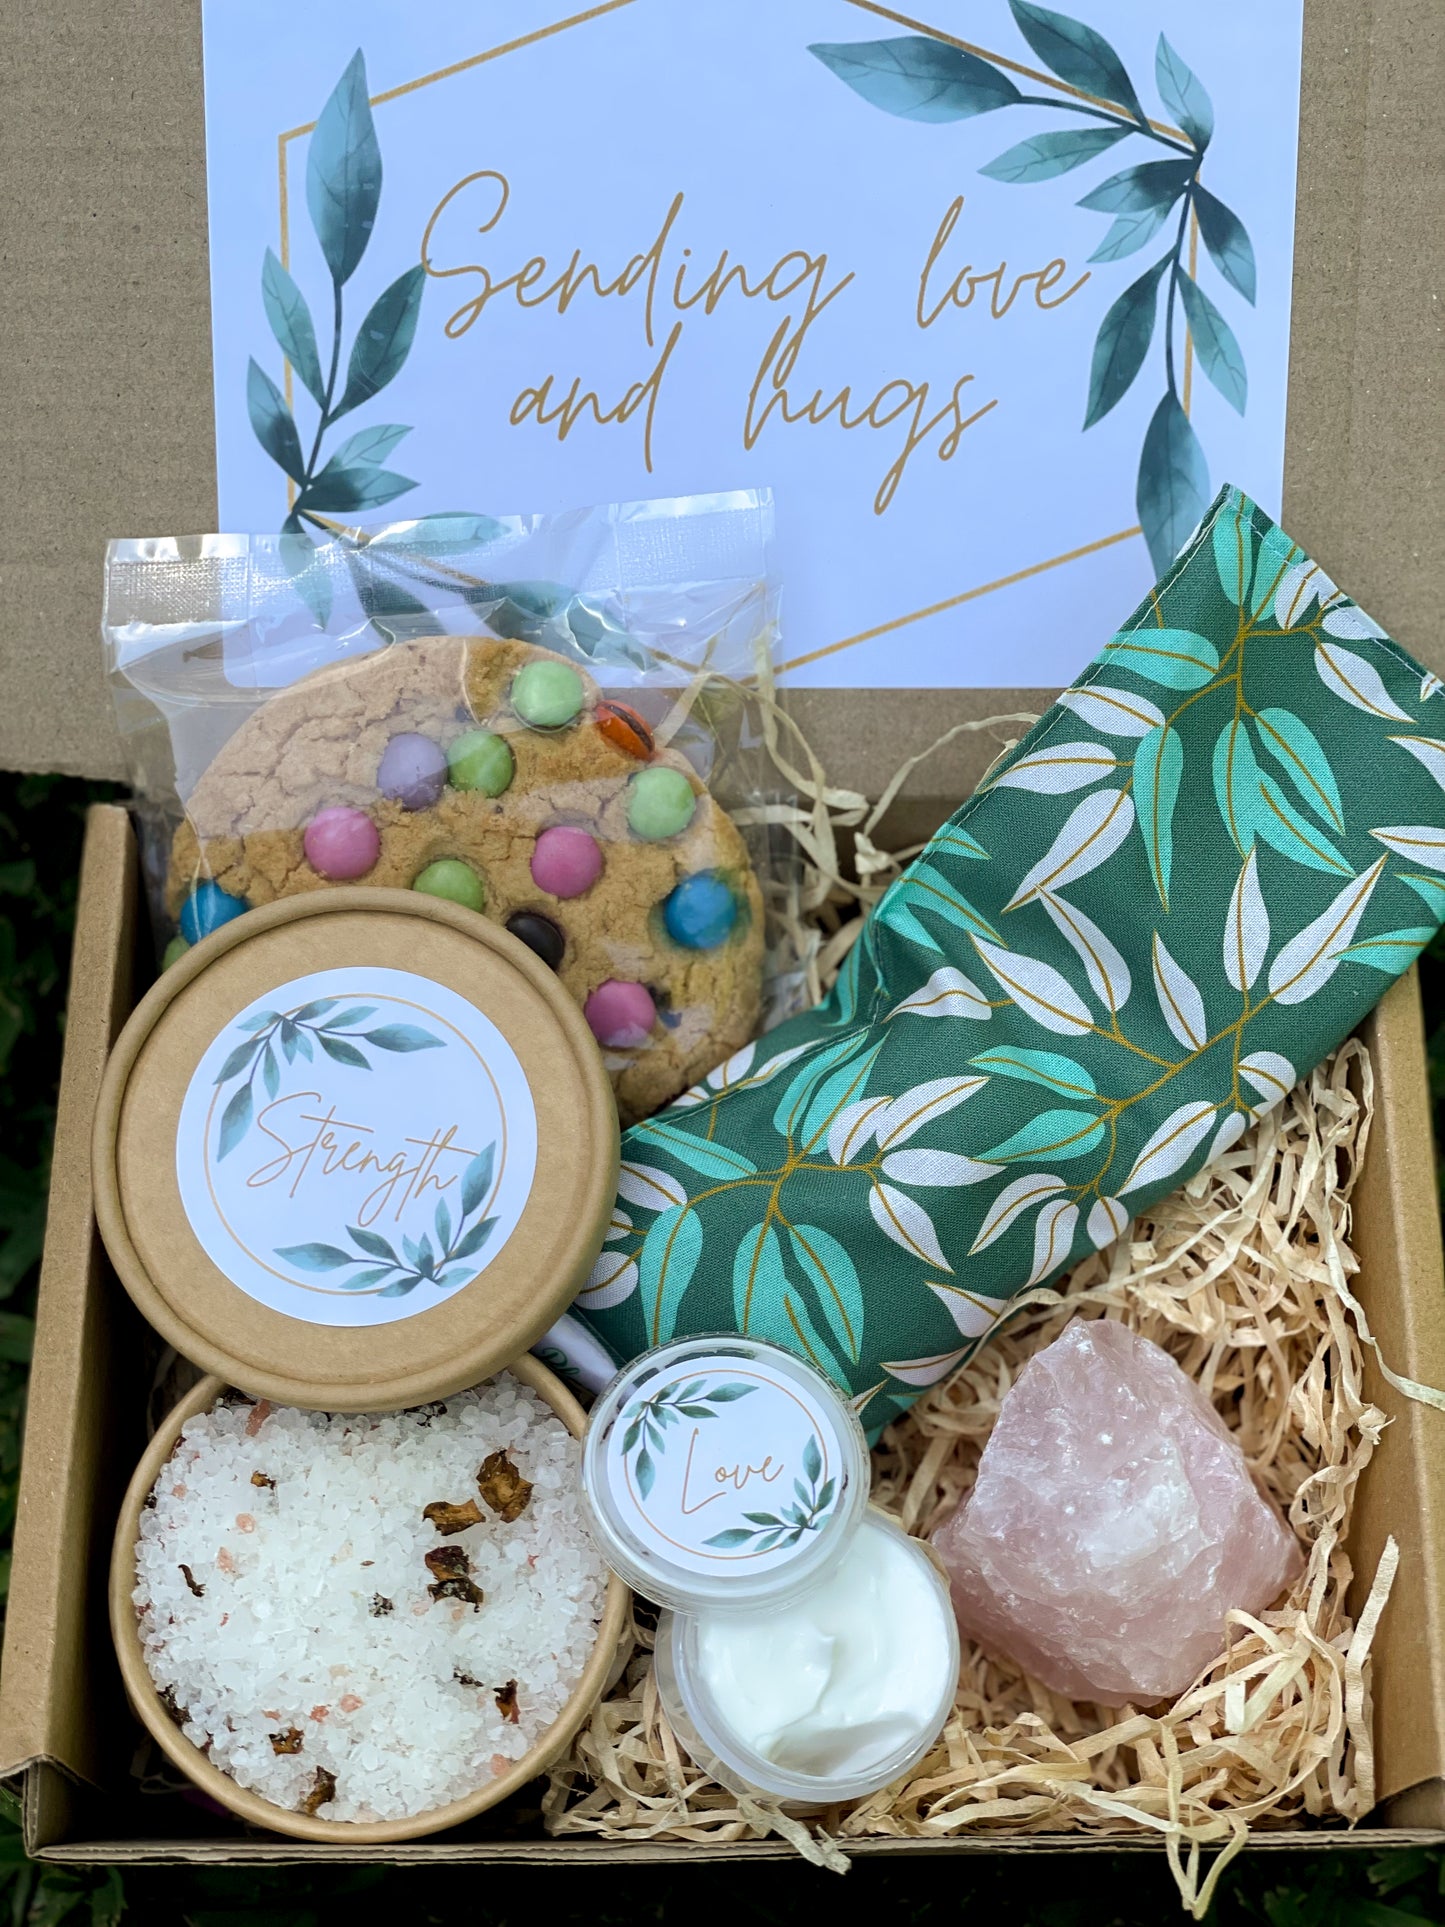 Sending love gift box, Get well soon Gift Box Cookie, care package, Surgery gift box, thinking of you gift box for sick friend